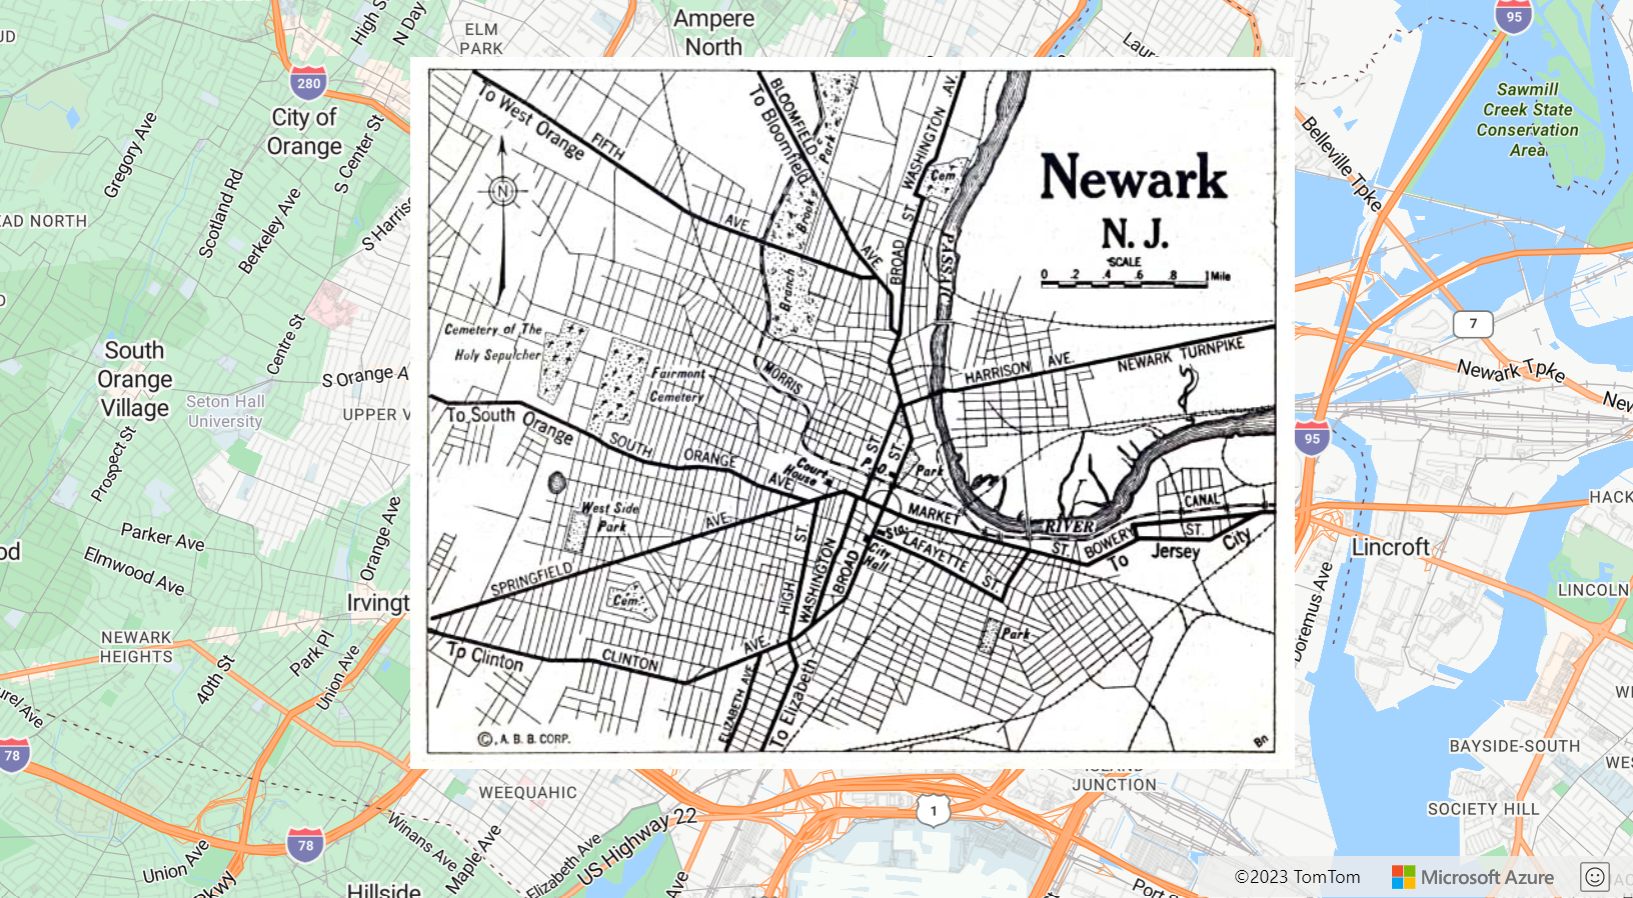 A screenshot showing a map with an image of a map of Newark New Jersey from 1922 as an Image layer.